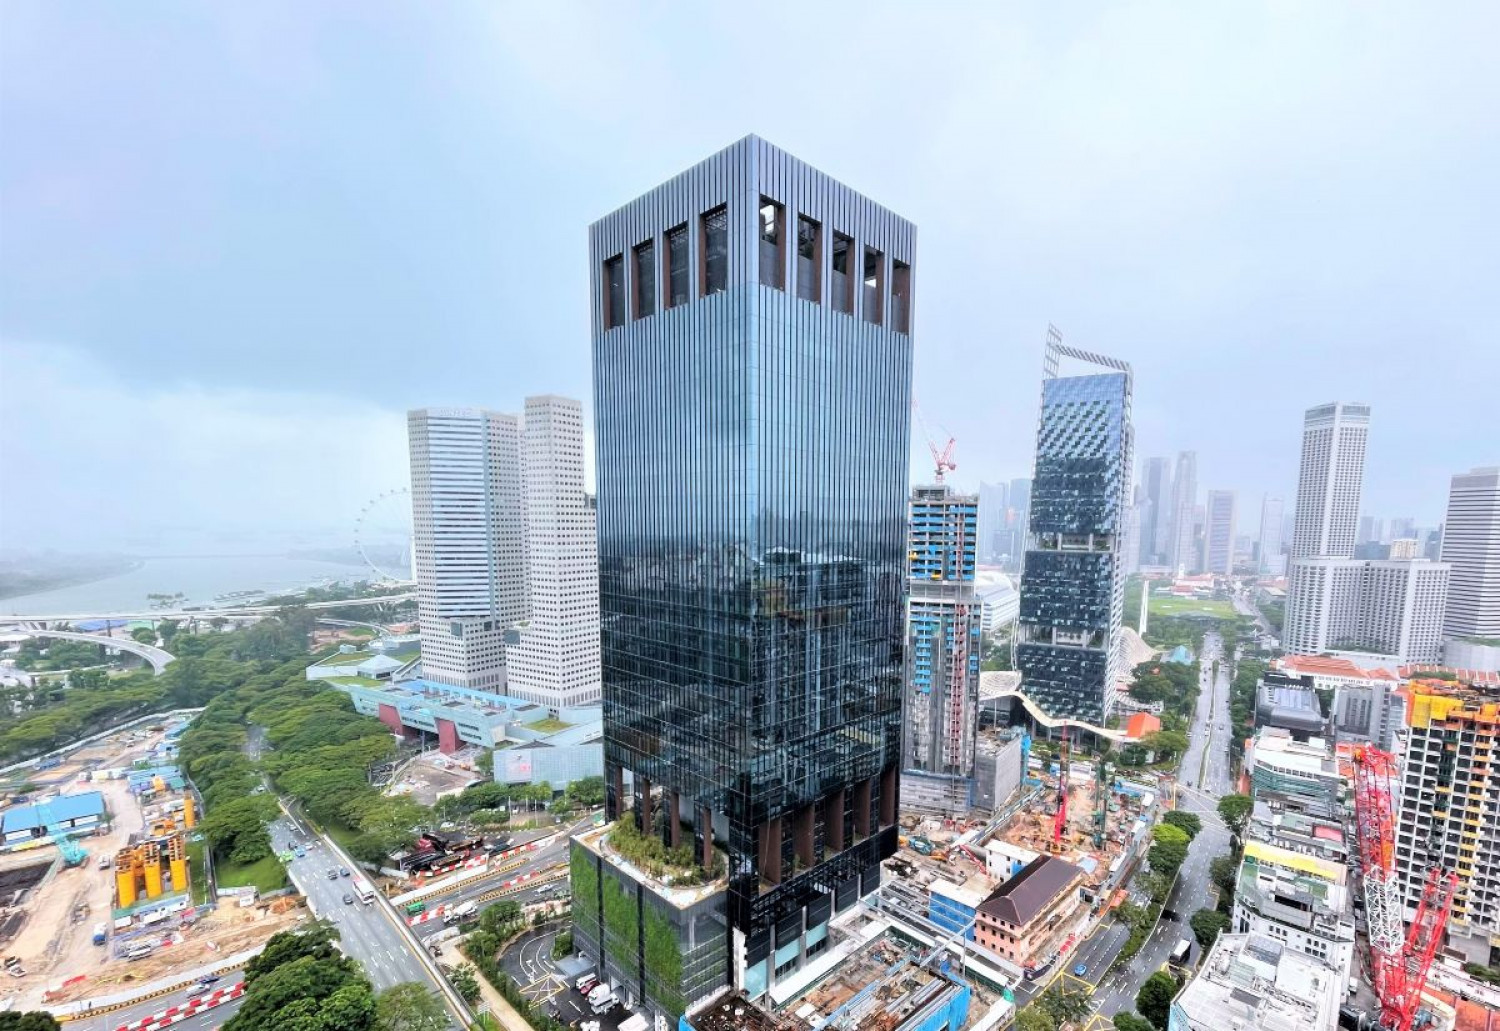 Publicis Groupe leases 55,000 sq ft at Guoco Midtown office tower - Property News